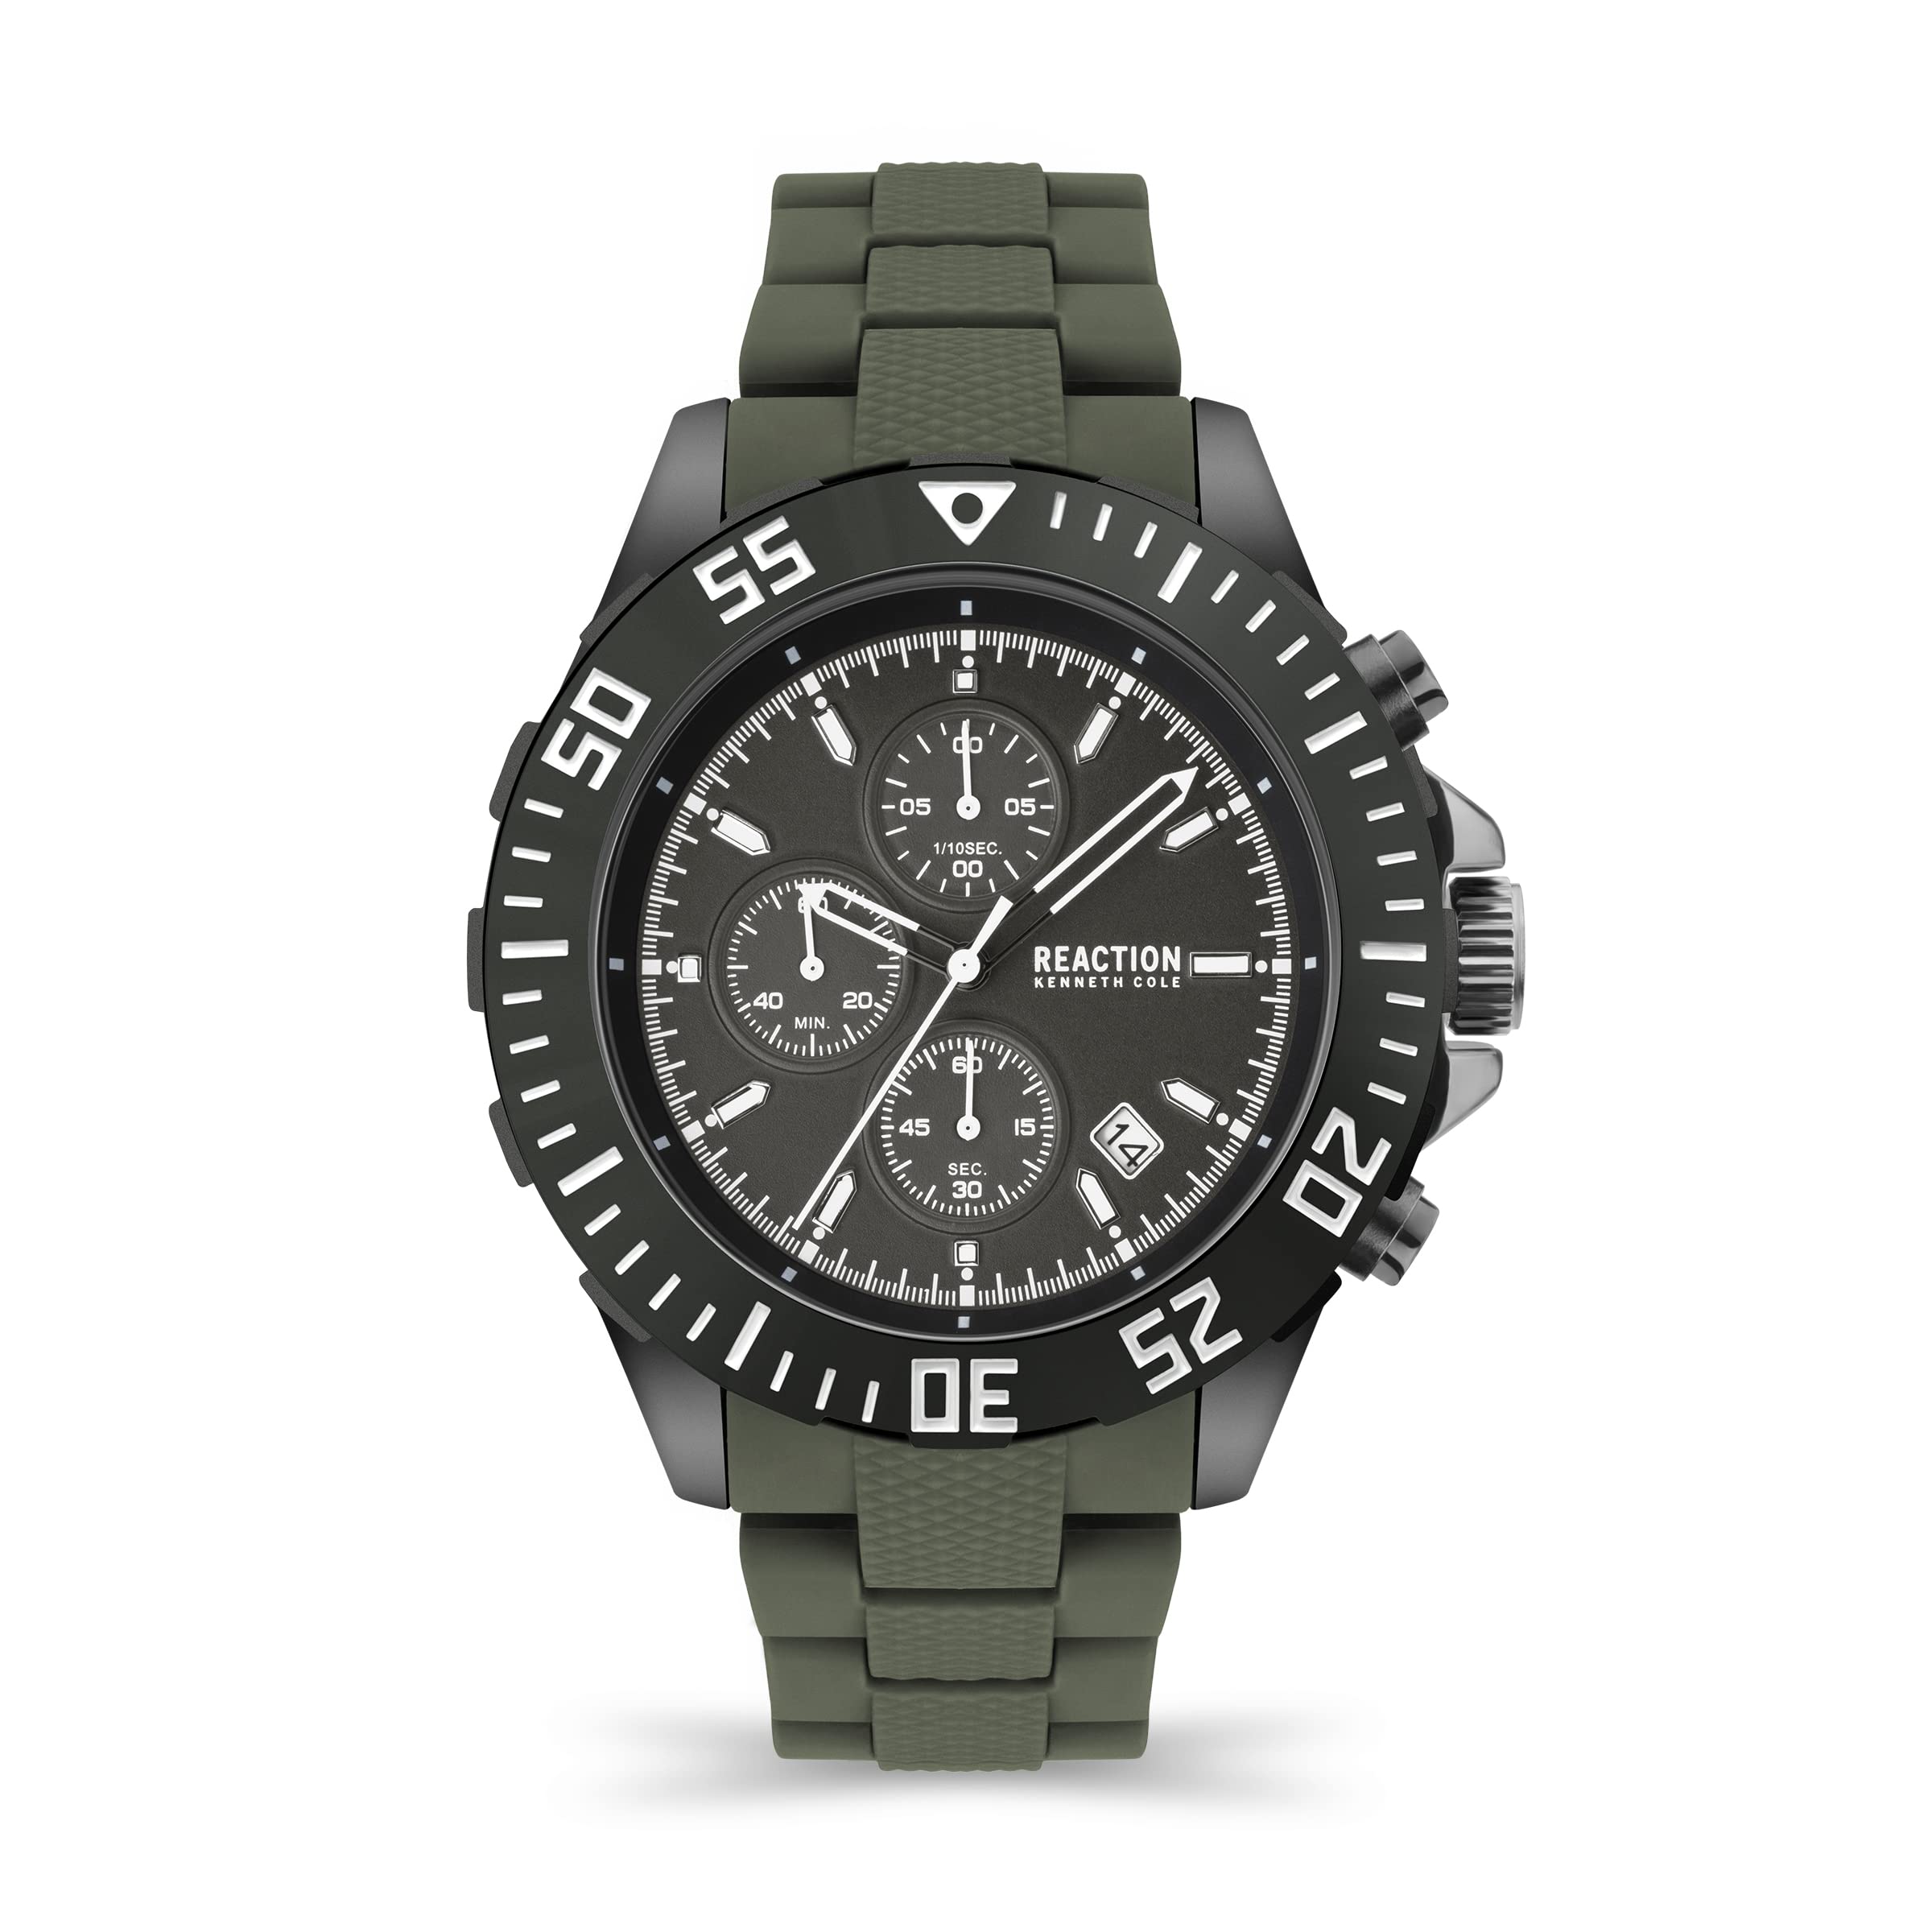 Kenneth Cole REACTION Men's Sport 46mm Chronograph Watch